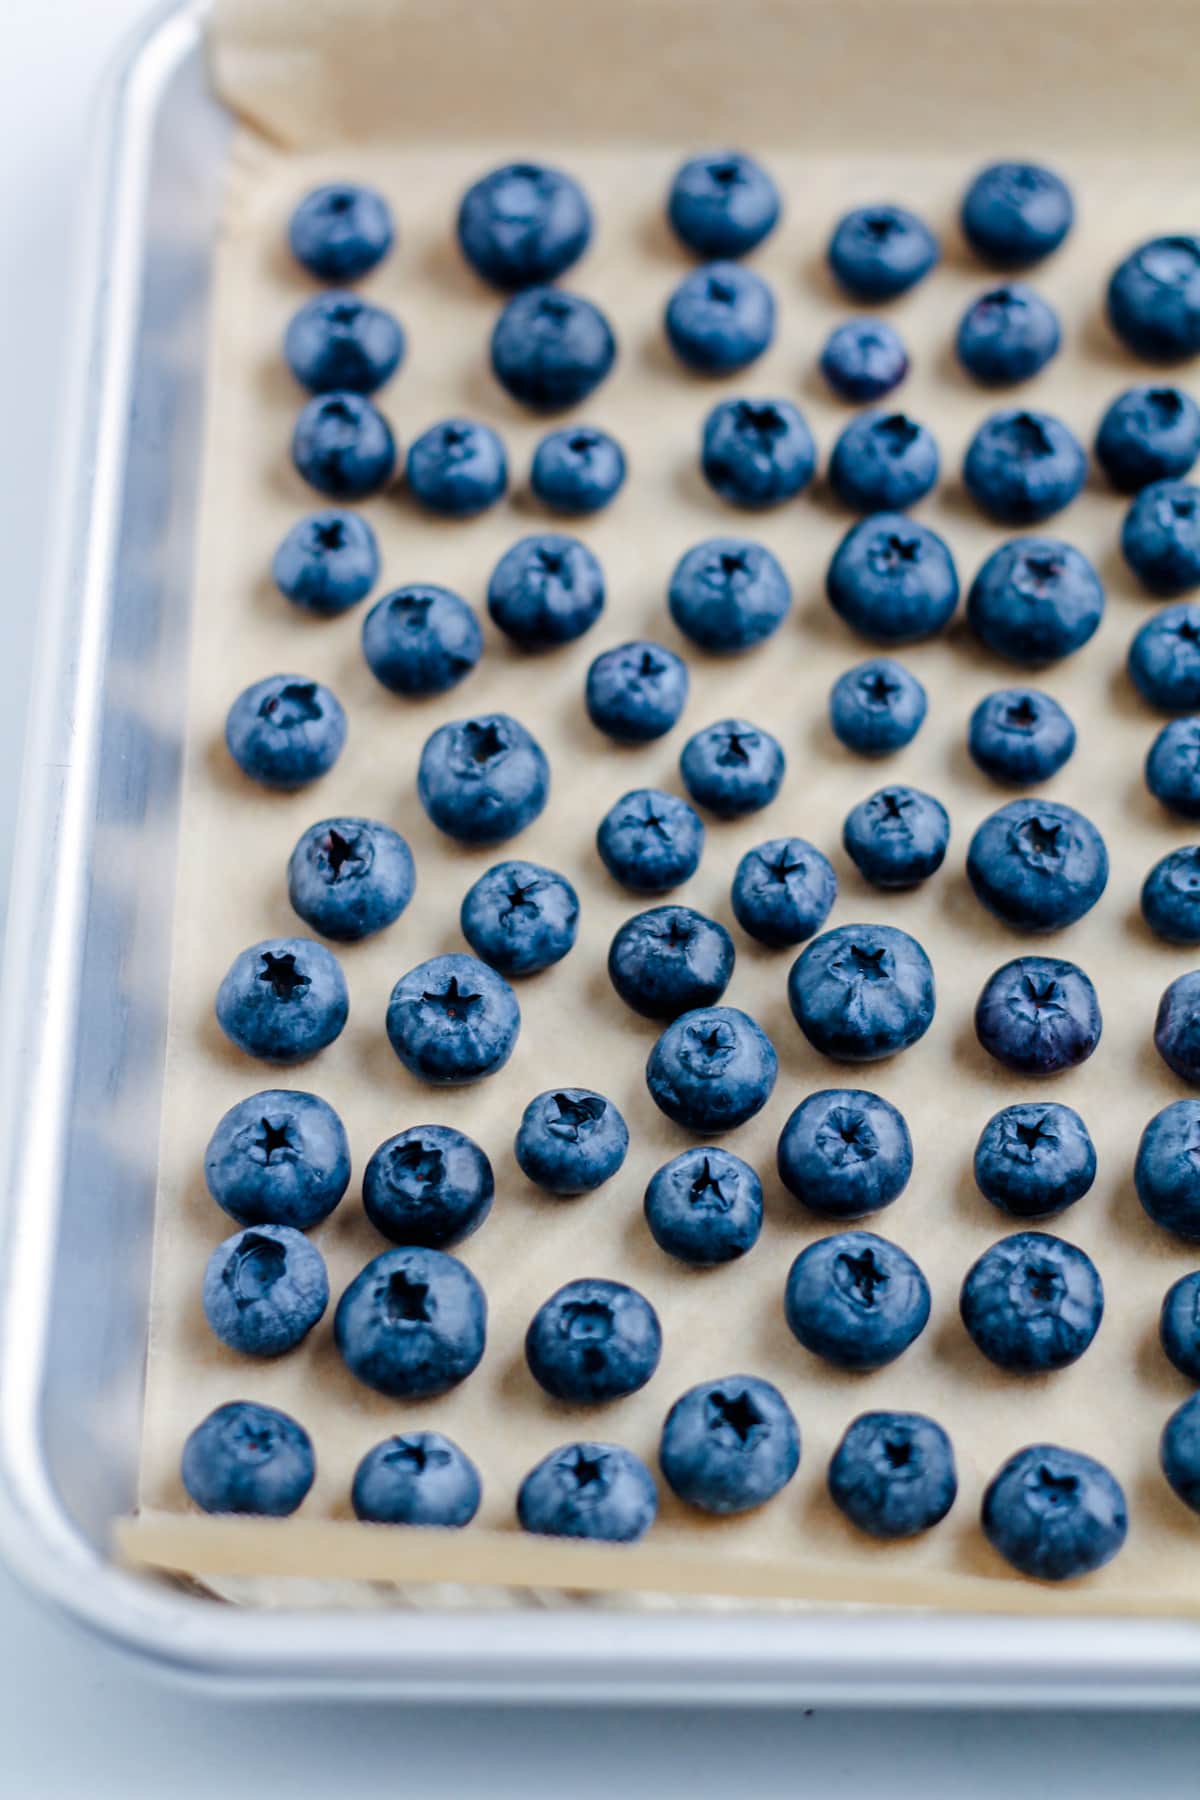 A baking tray of blueberries.